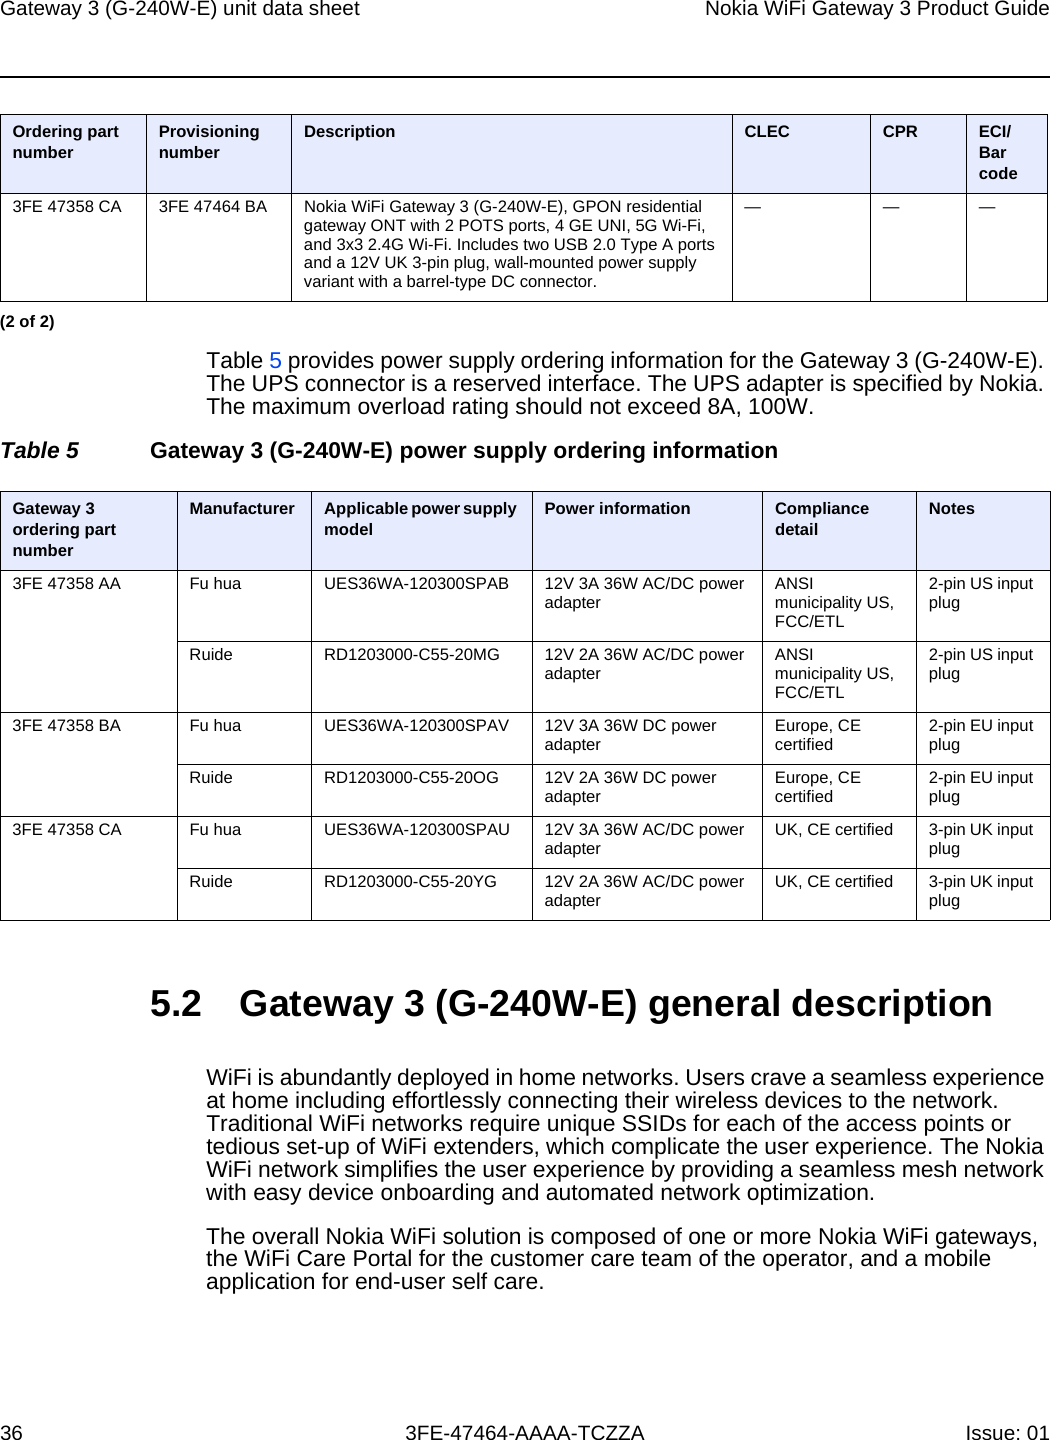 Gateway 3 (G-240W-E) unit data sheet36Nokia WiFi Gateway 3 Product Guide3FE-47464-AAAA-TCZZA Issue: 01 Table 5 provides power supply ordering information for the Gateway 3 (G-240W-E). The UPS connector is a reserved interface. The UPS adapter is specified by Nokia. The maximum overload rating should not exceed 8A, 100W.Table 5 Gateway 3 (G-240W-E) power supply ordering information5.2 Gateway 3 (G-240W-E) general descriptionWiFi is abundantly deployed in home networks. Users crave a seamless experience at home including effortlessly connecting their wireless devices to the network. Traditional WiFi networks require unique SSIDs for each of the access points or tedious set-up of WiFi extenders, which complicate the user experience. The Nokia WiFi network simplifies the user experience by providing a seamless mesh network with easy device onboarding and automated network optimization.The overall Nokia WiFi solution is composed of one or more Nokia WiFi gateways, the WiFi Care Portal for the customer care team of the operator, and a mobile application for end-user self care.3FE 47358 CA 3FE 47464 BA Nokia WiFi Gateway 3 (G-240W-E), GPON residential gateway ONT with 2 POTS ports, 4 GE UNI, 5G Wi-Fi, and 3x3 2.4G Wi-Fi. Includes two USB 2.0 Type A ports and a 12V UK 3-pin plug, wall-mounted power supply variant with a barrel-type DC connector.———Ordering part number Provisioning number Description CLEC CPR ECI/Bar code(2 of 2)Gateway 3 ordering part numberManufacturer Applicable power supply model Power information Compliance detail Notes3FE 47358 AA Fu hua UES36WA-120300SPAB 12V 3A 36W AC/DC power adapter ANSI municipality US, FCC/ETL2-pin US input plugRuide RD1203000-C55-20MG 12V 2A 36W AC/DC power adapter ANSI municipality US, FCC/ETL2-pin US input plug3FE 47358 BA Fu hua UES36WA-120300SPAV 12V 3A 36W DC power adapter Europe, CE certified 2-pin EU input plugRuide RD1203000-C55-20OG 12V 2A 36W DC power adapter Europe, CE certified 2-pin EU input plug3FE 47358 CA Fu hua UES36WA-120300SPAU 12V 3A 36W AC/DC power adapter UK, CE certified 3-pin UK input plugRuide RD1203000-C55-20YG 12V 2A 36W AC/DC power adapter UK, CE certified 3-pin UK input plug